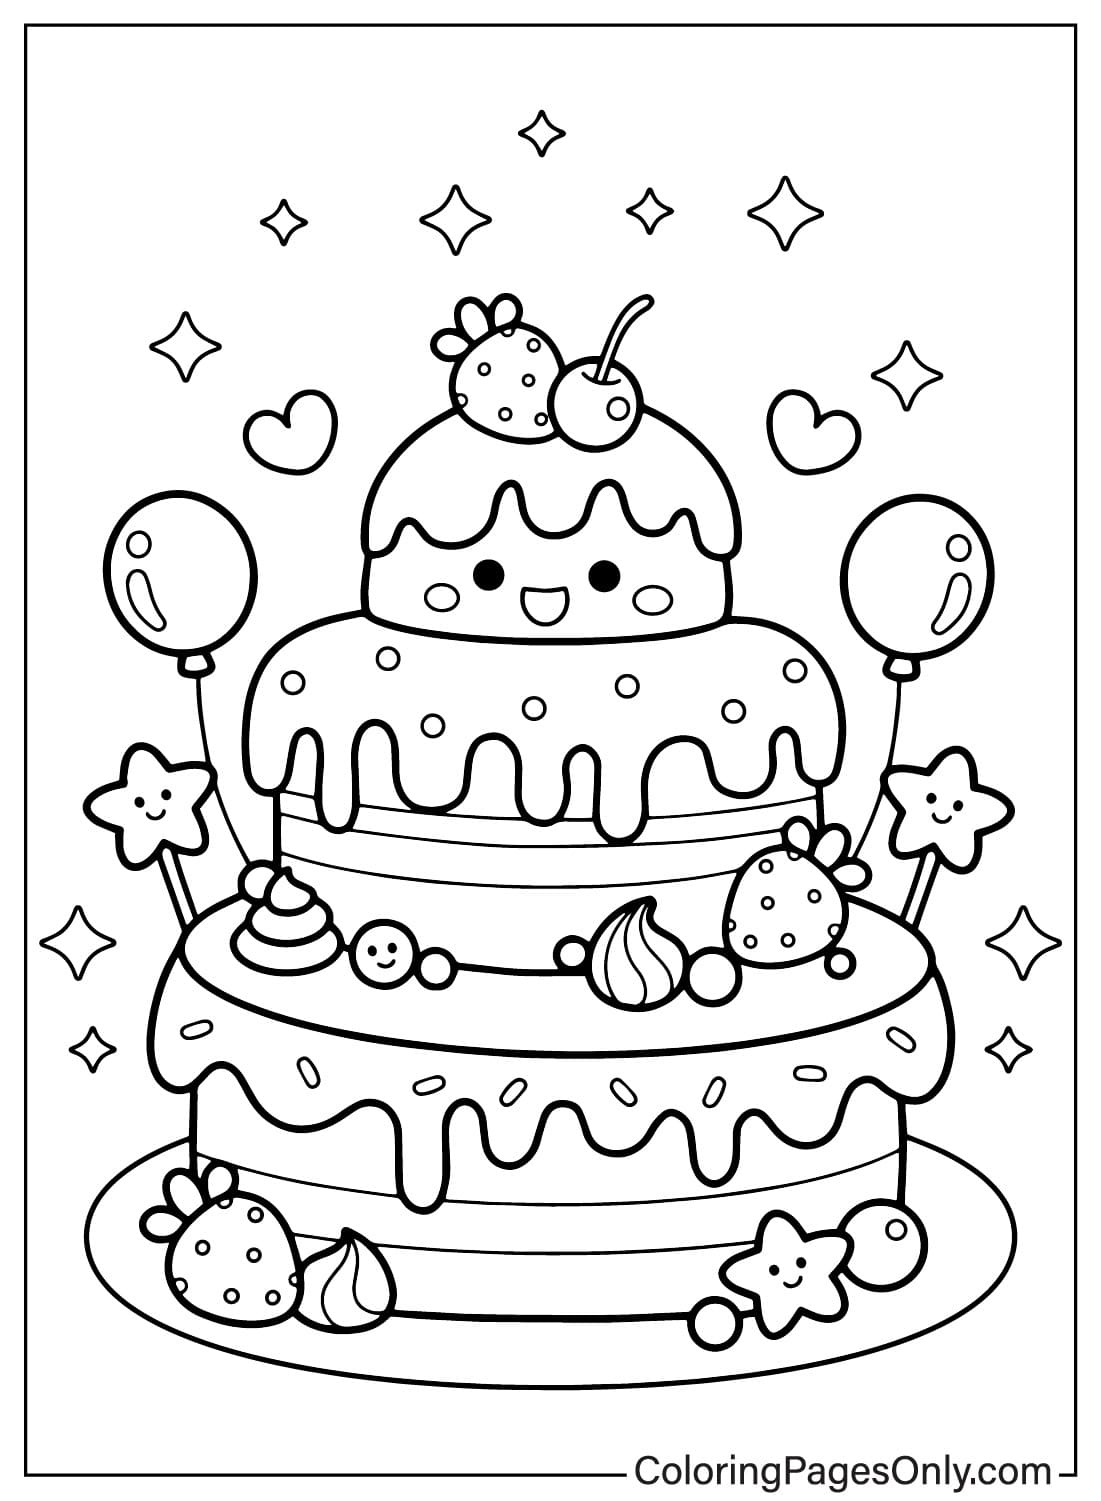 Birthday Cake Coloring Page Free from Birthday Cake